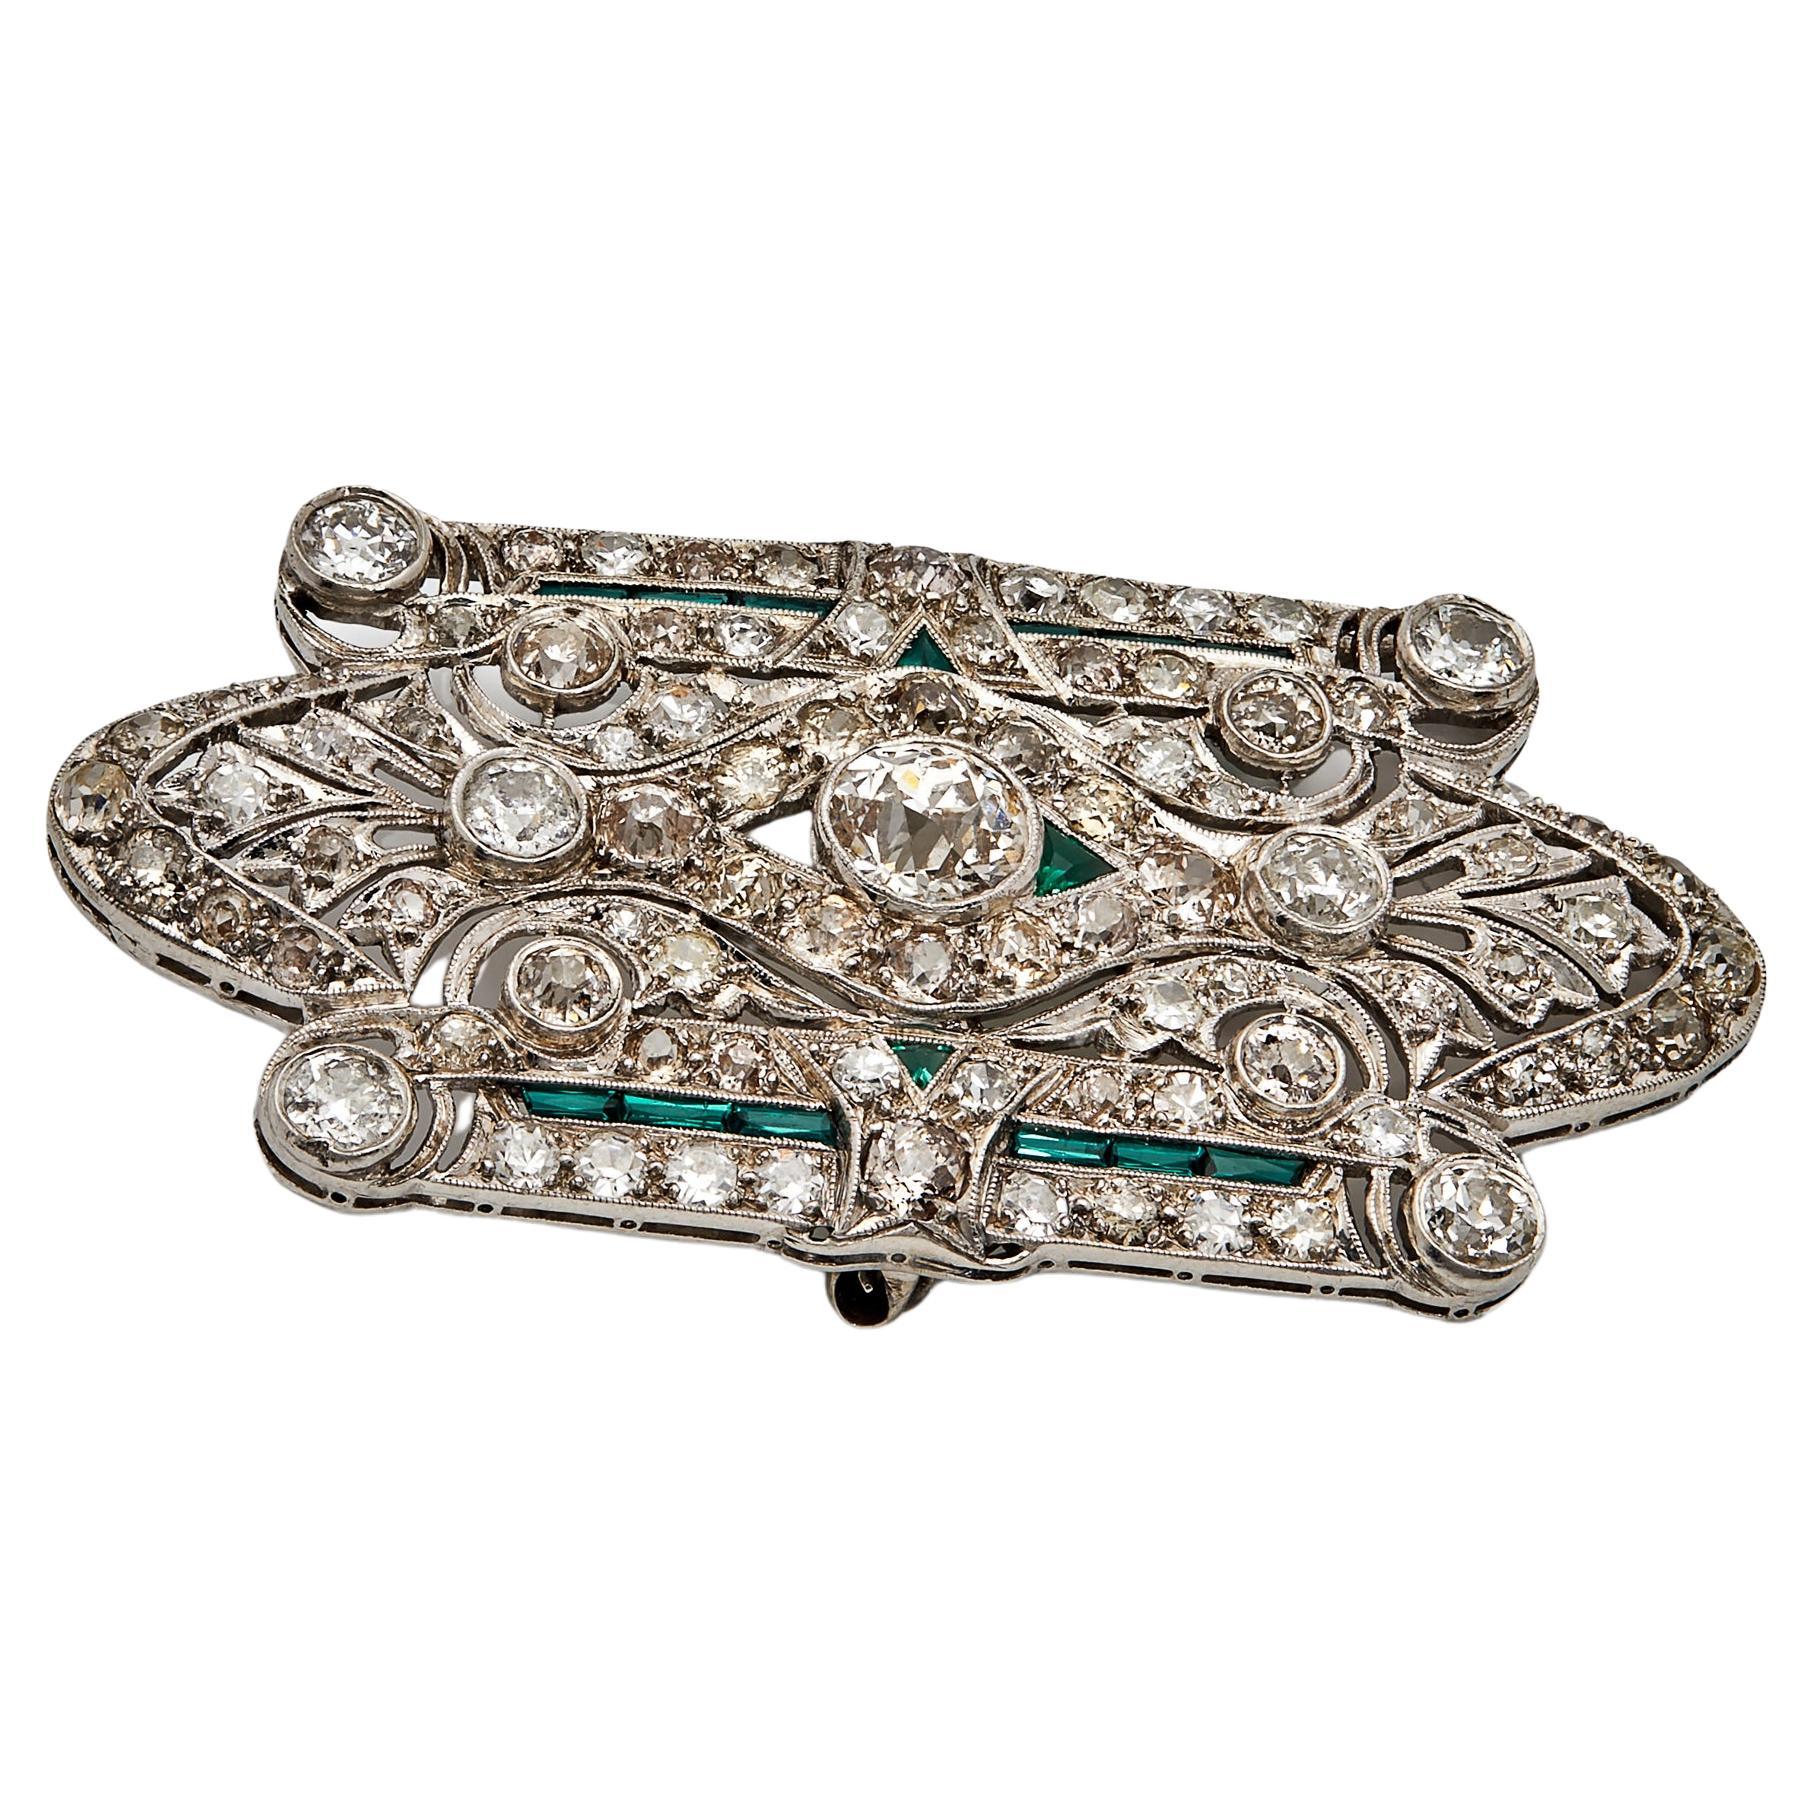  Antique Grand Occasion Brooch